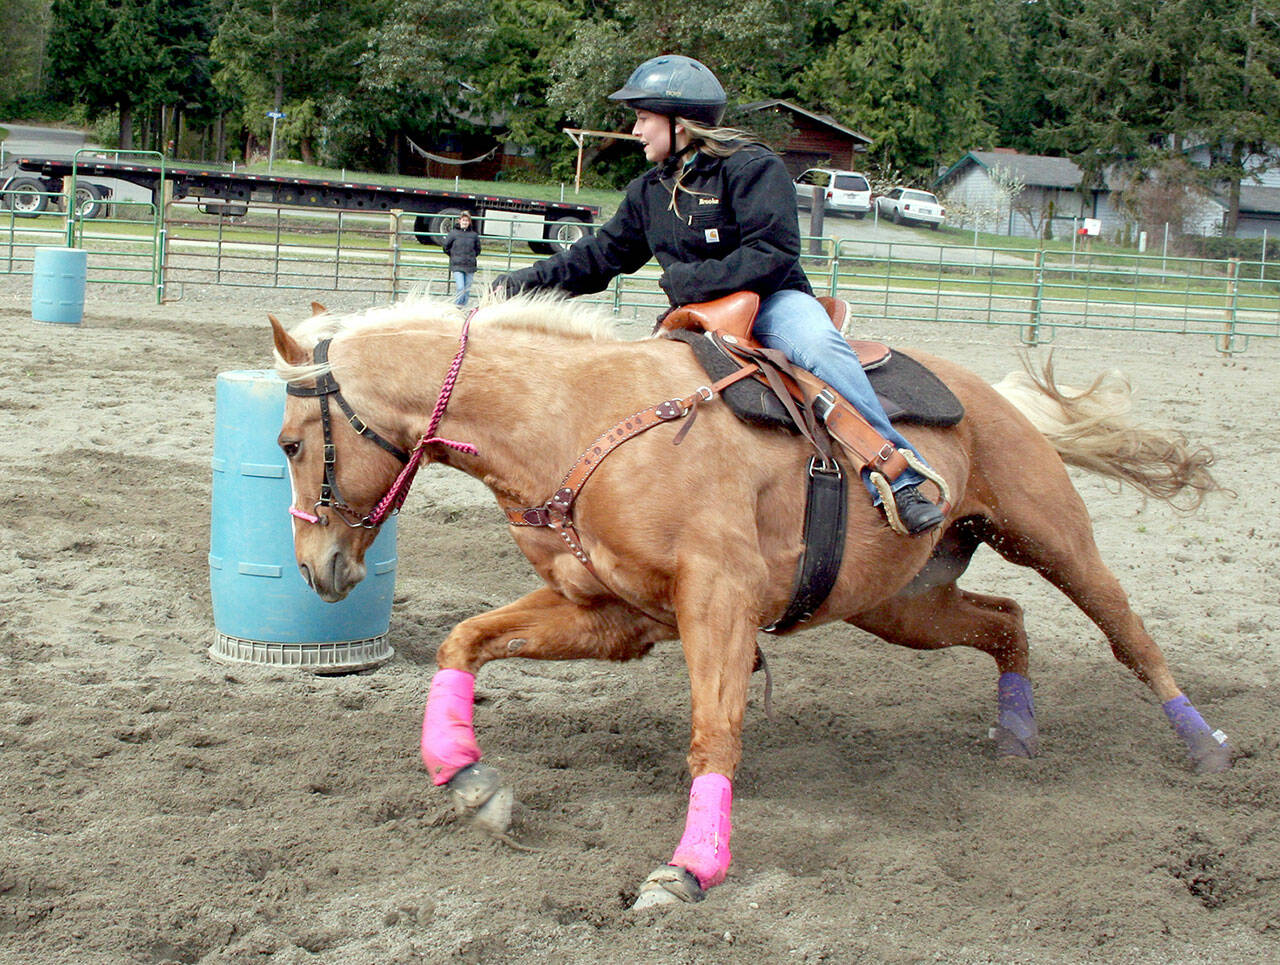 Brooke Stromberg and Lacey, both 15, make a winning turn during a barrel racing competition during an April game show in 2008 at the Jefferson County fairgrounds. Later, the duo became the 2008 Washington High School Equestrian Team and Patterned Speed Horse Association’s (junior division) state champions in barrel racing. Both shows were held in Wenatchee. (Karen Griffiths/For Peninsula Daily News)